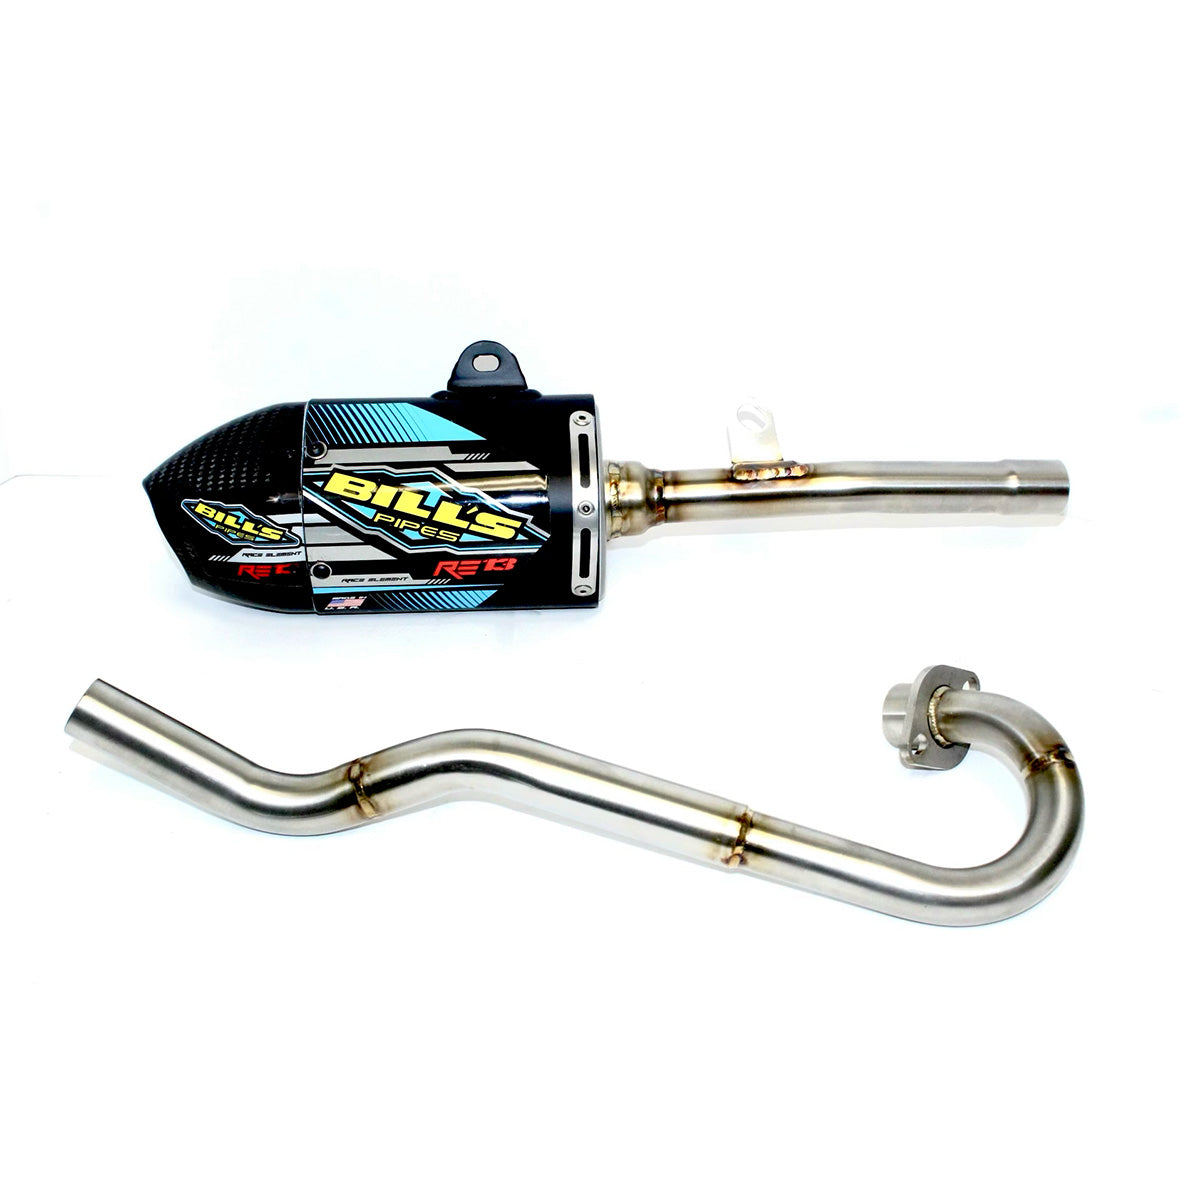 Bill's Pipes RE 13 Exhaust - CRF125